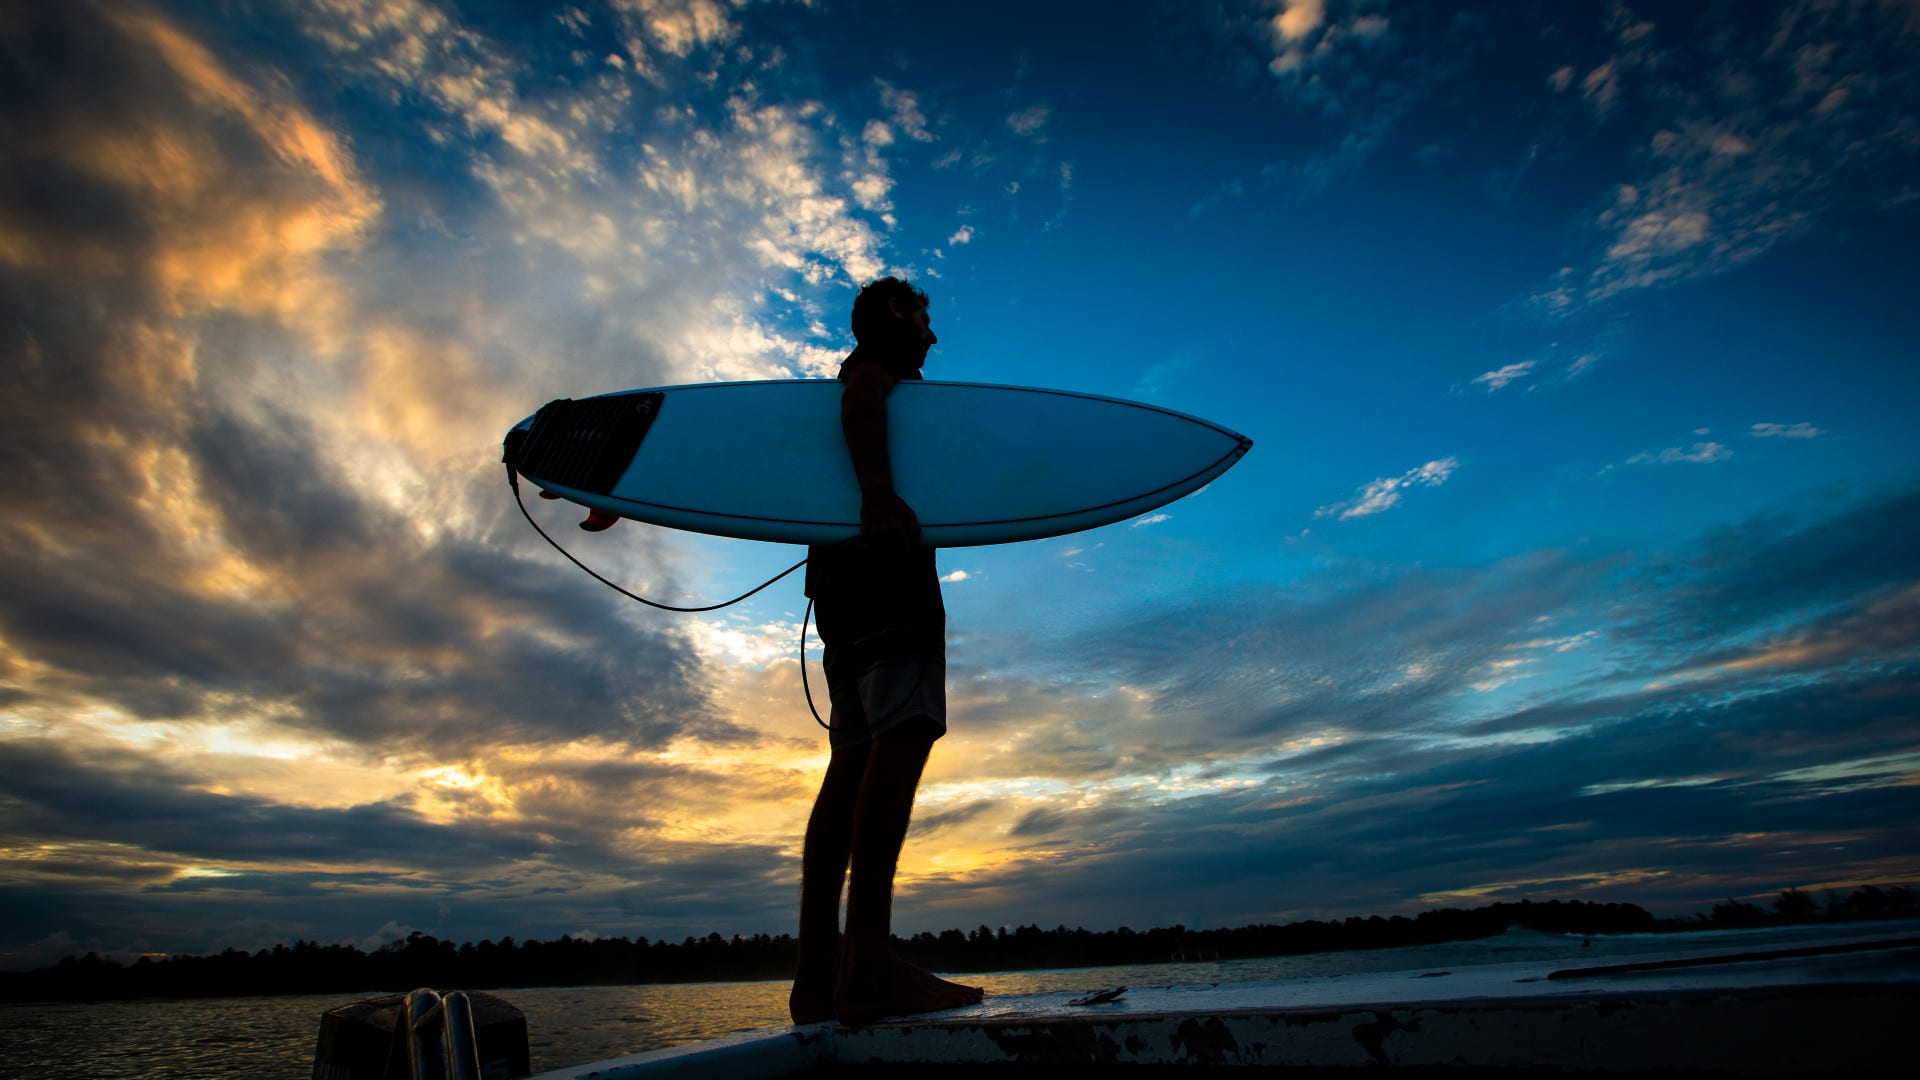 A lone surfer holding a board stands against a sunsetting in the background.